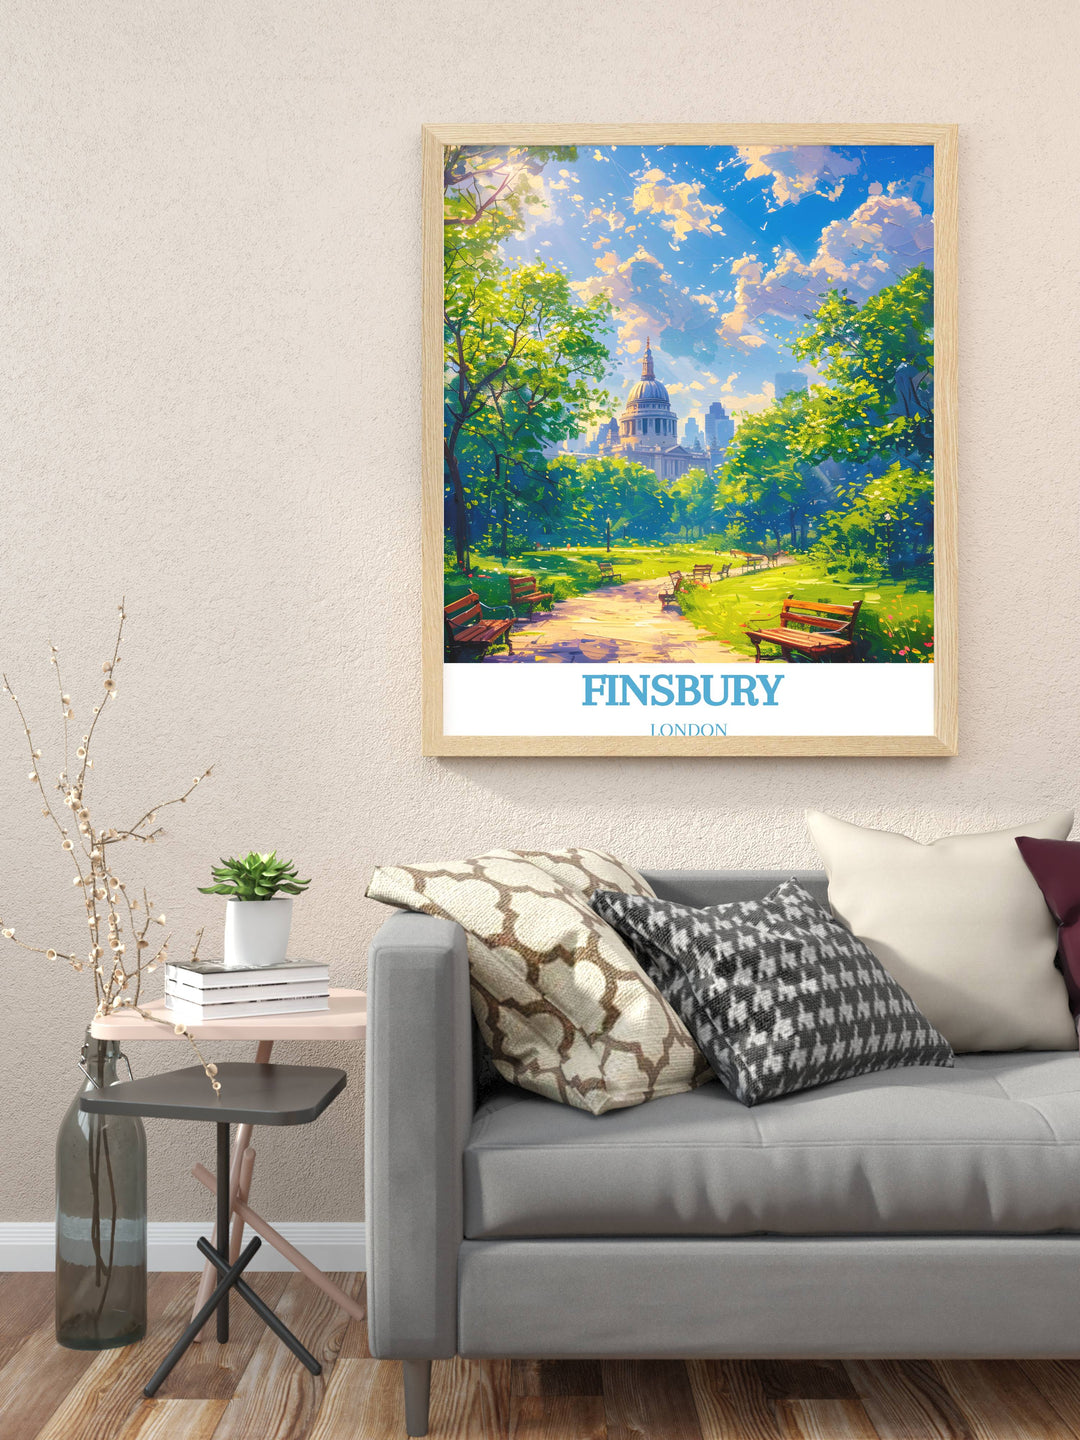 Beautifully crafted Finsbury Park framed print showcasing the parks lush greenery and peaceful atmosphere. Perfect for home decor, this vintage travel print adds a timeless touch to any room, making it a cherished piece of wall art.